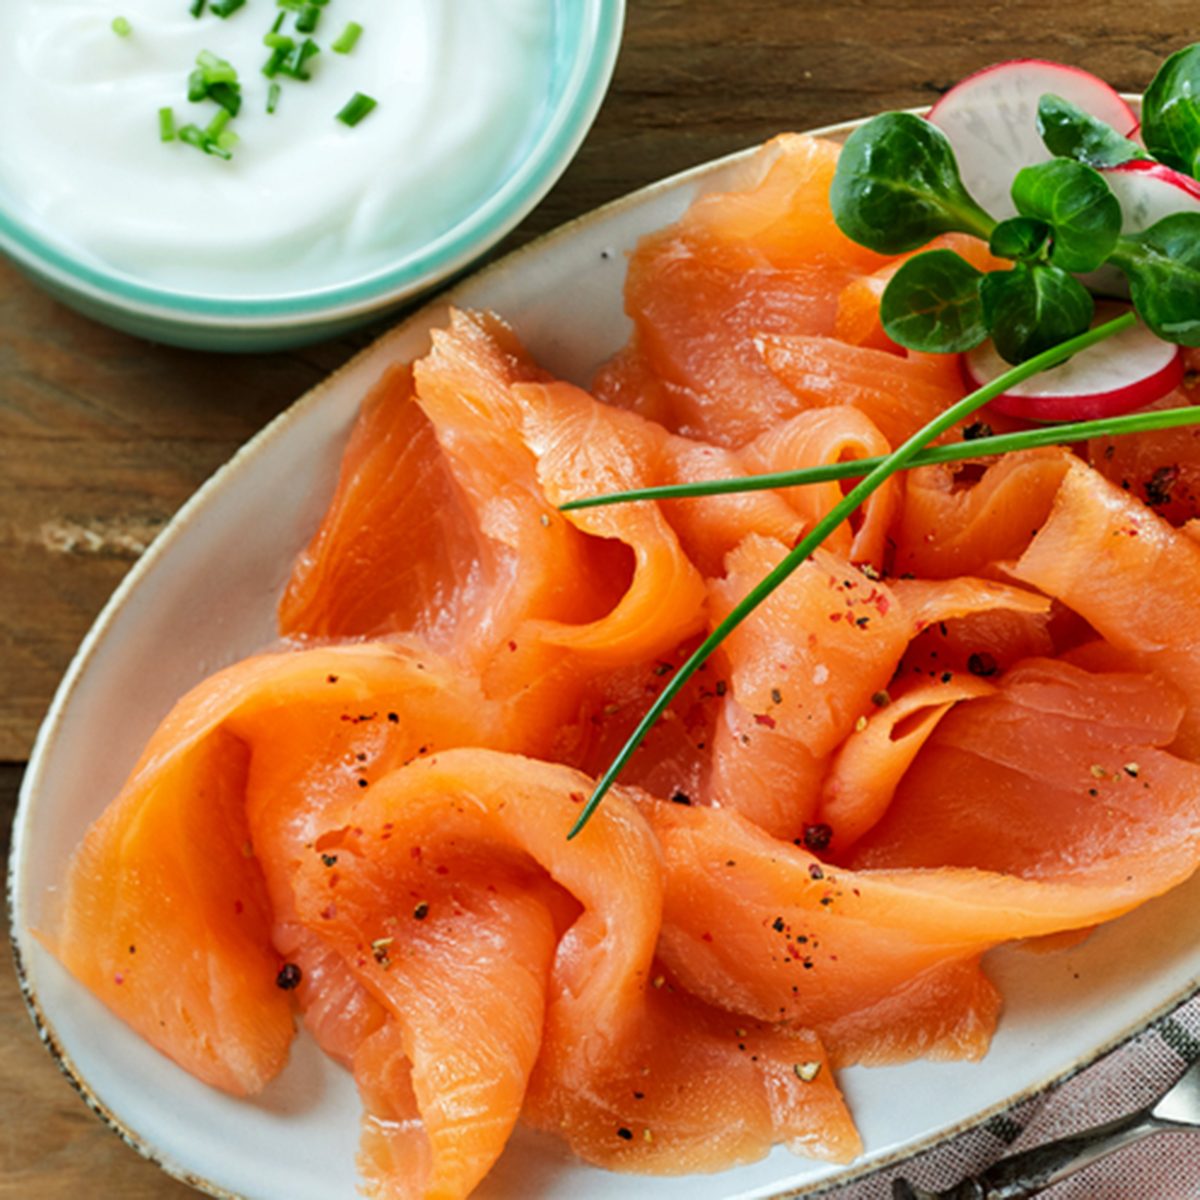 Fresh slices of healthy smoked salmon or lok served with a creamy chive sauce on an oval platter viewed from above on wood with copy space